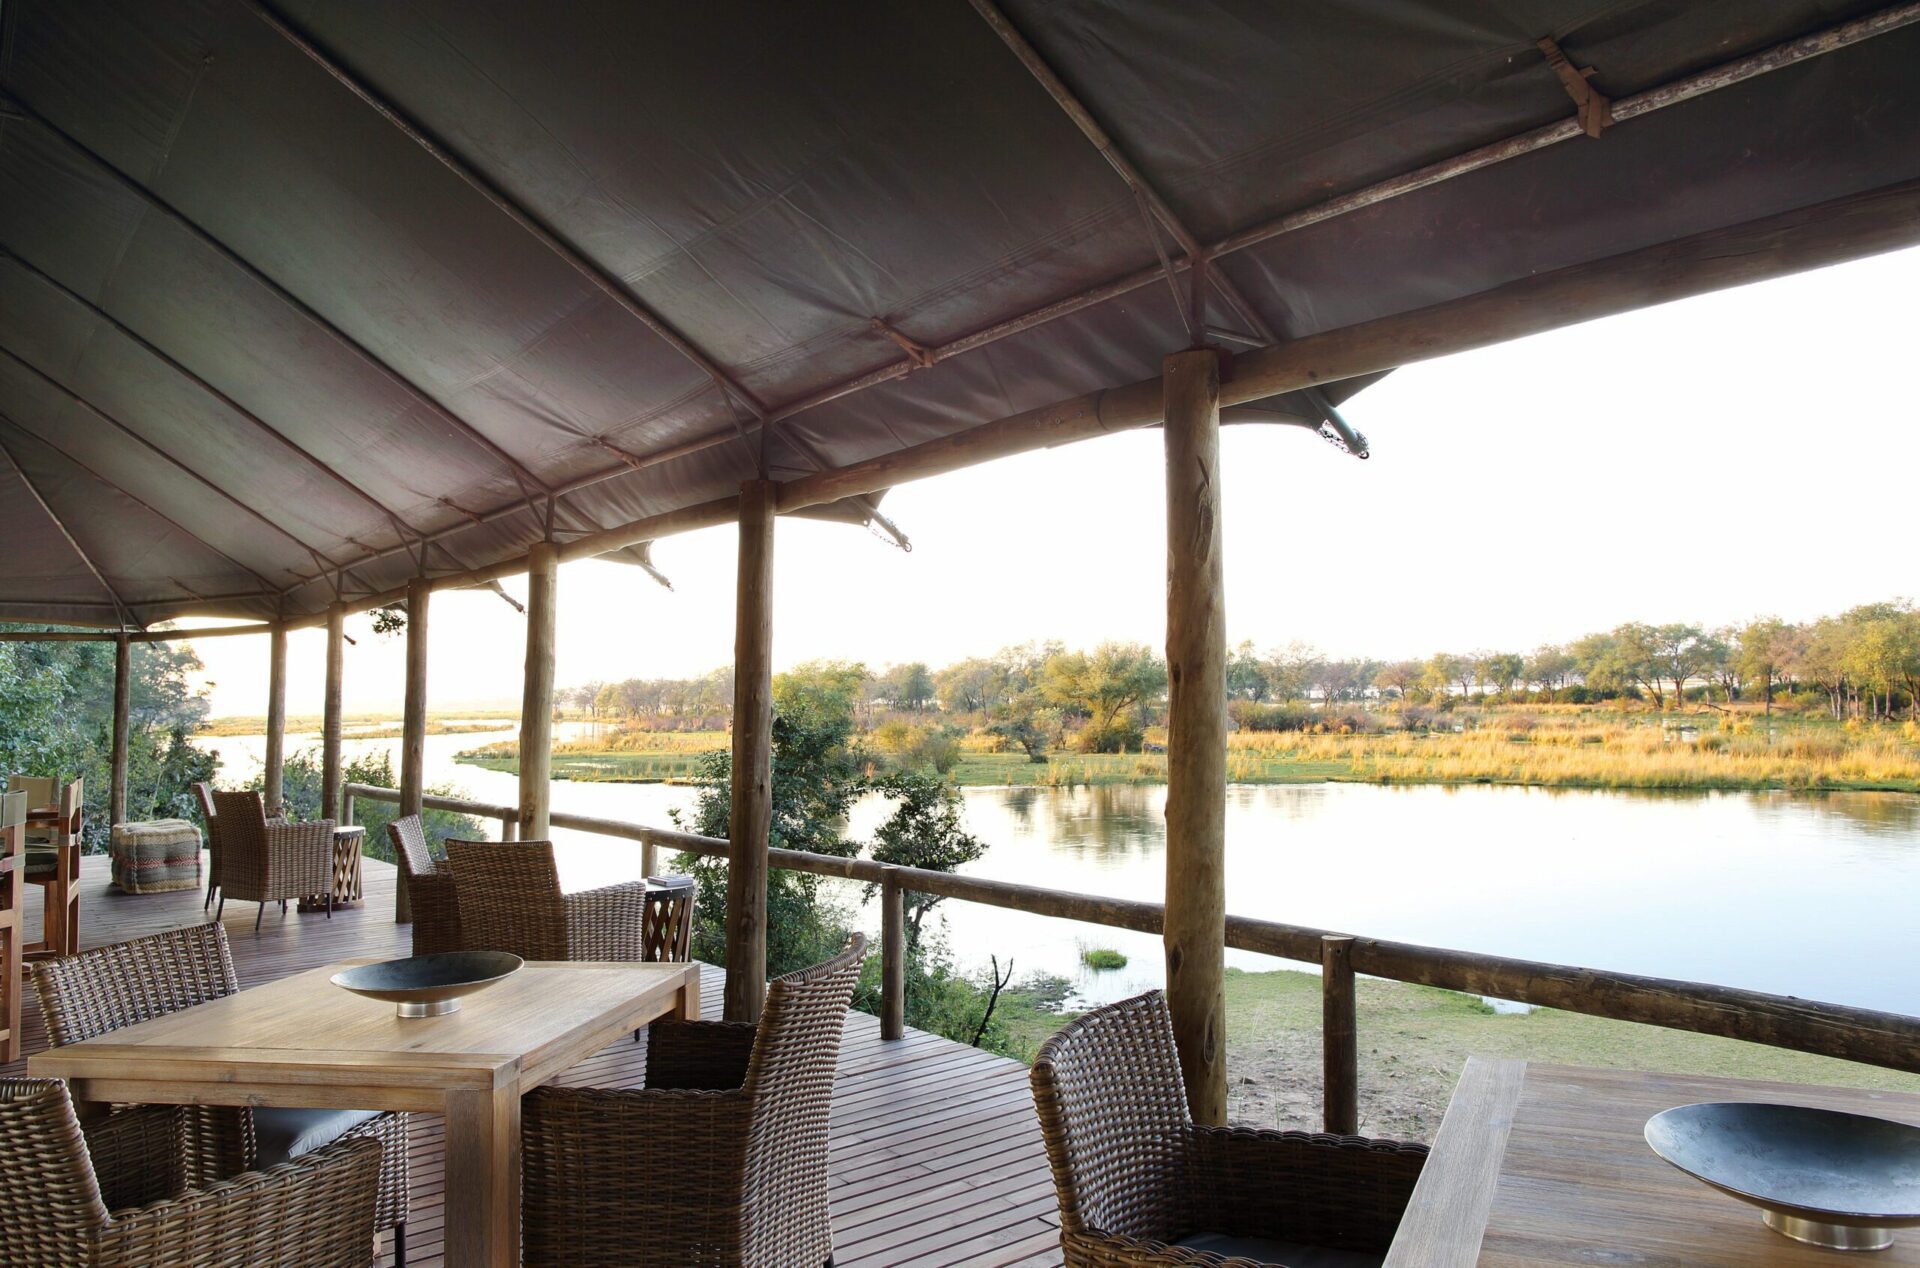 dining area at Amanzi camp in the Lower Zambezi looking out on the river.